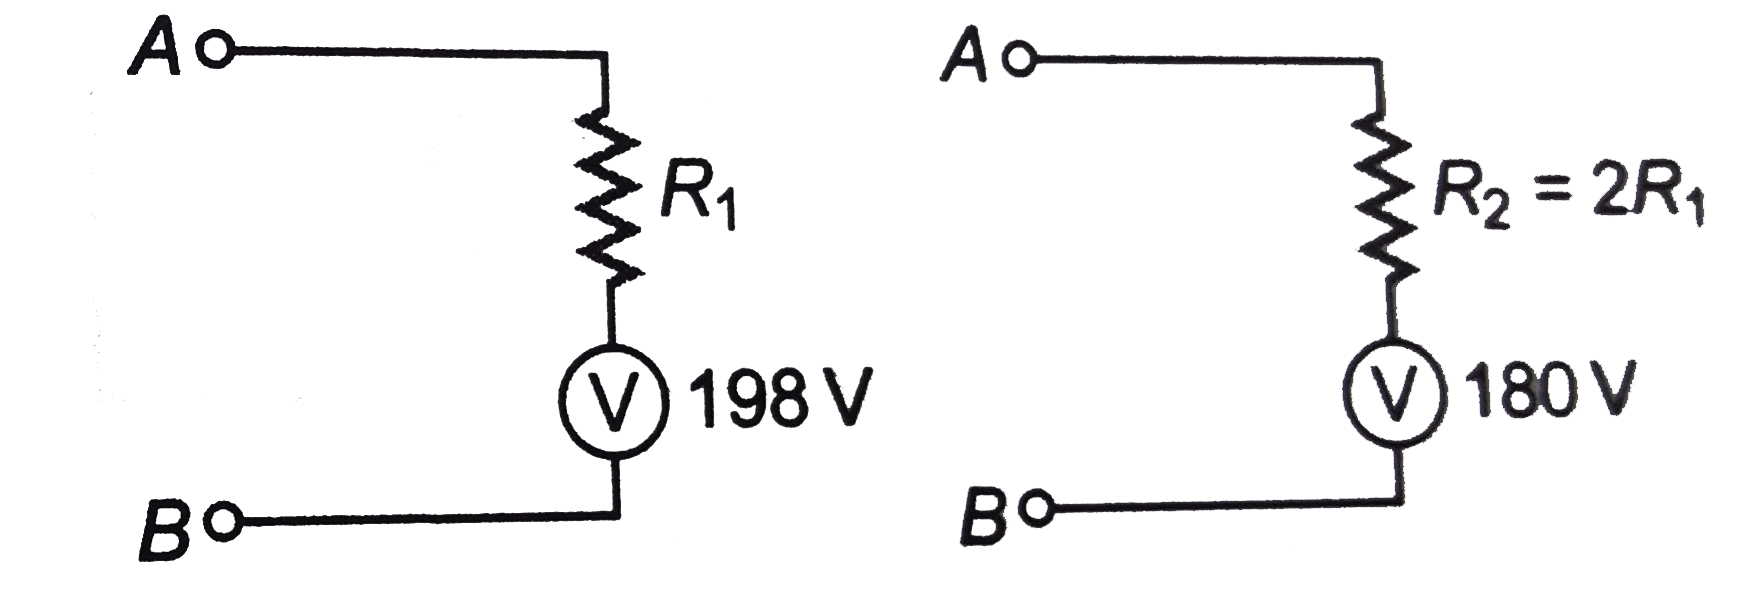 A voltmeter connected in series with a resistance R1 to a circuit indicates a voltage V1=198V. When a series resistor R2=2R1 is used, the voltmeter indicates as voltage V2=180V. If the resistance of the voltmeter is RV=900Omega, then the applied voltage ( in volt ) across A and B is